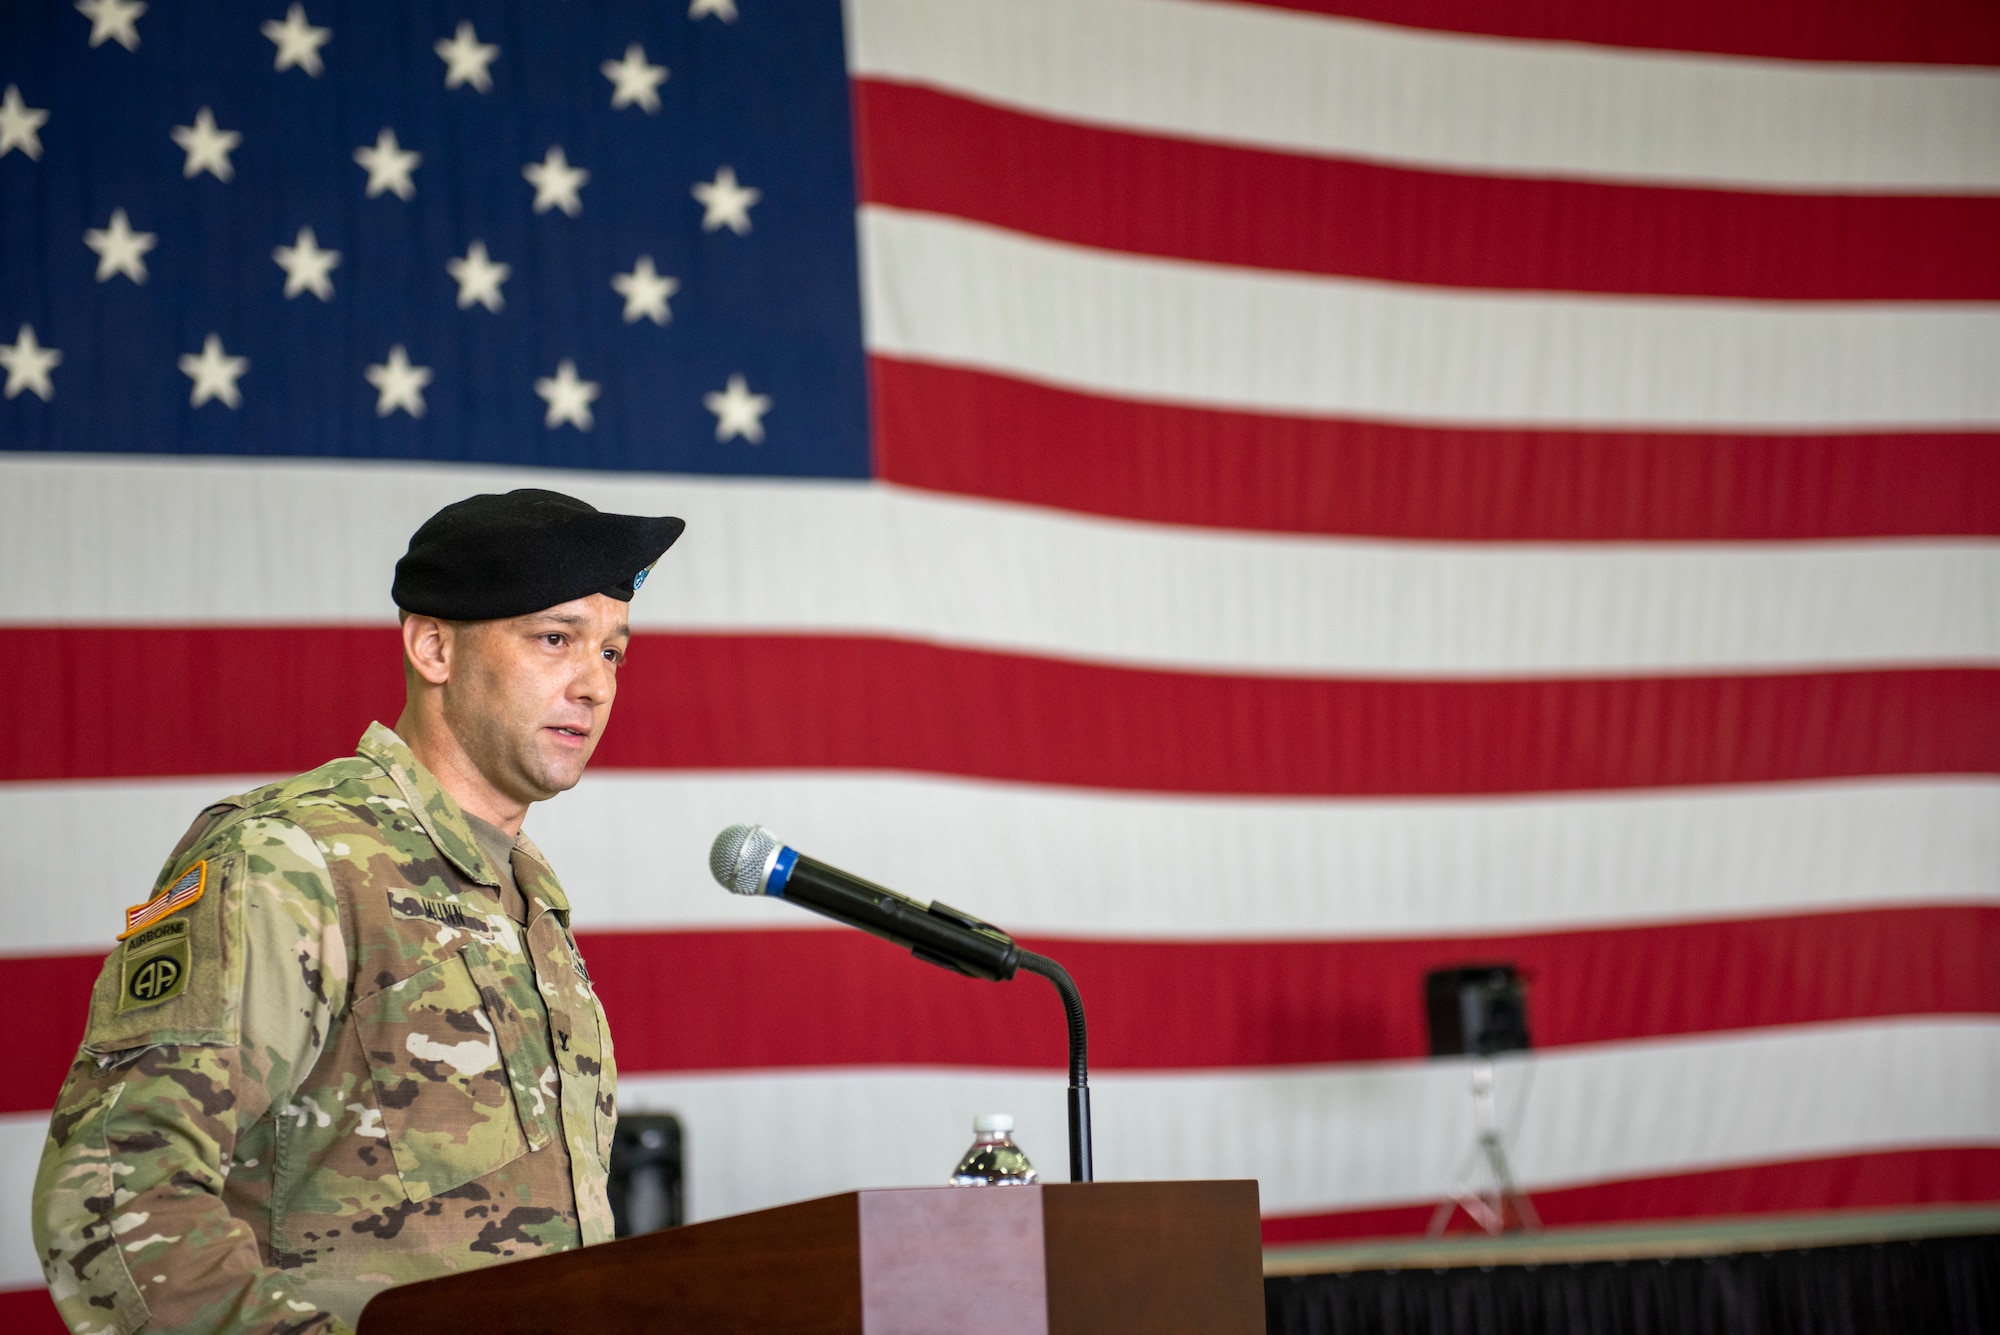 U.S. Army 3rd Battlefield Coordination Detachment - Korea, held a change of command ceremony at Osan Air Base, Republic of Korea, July 7, 2021. U.S. Army Col. Michael Mullins transferred command of the 3-BCD-K to U.S. Army Col. Jeffrey Munn.